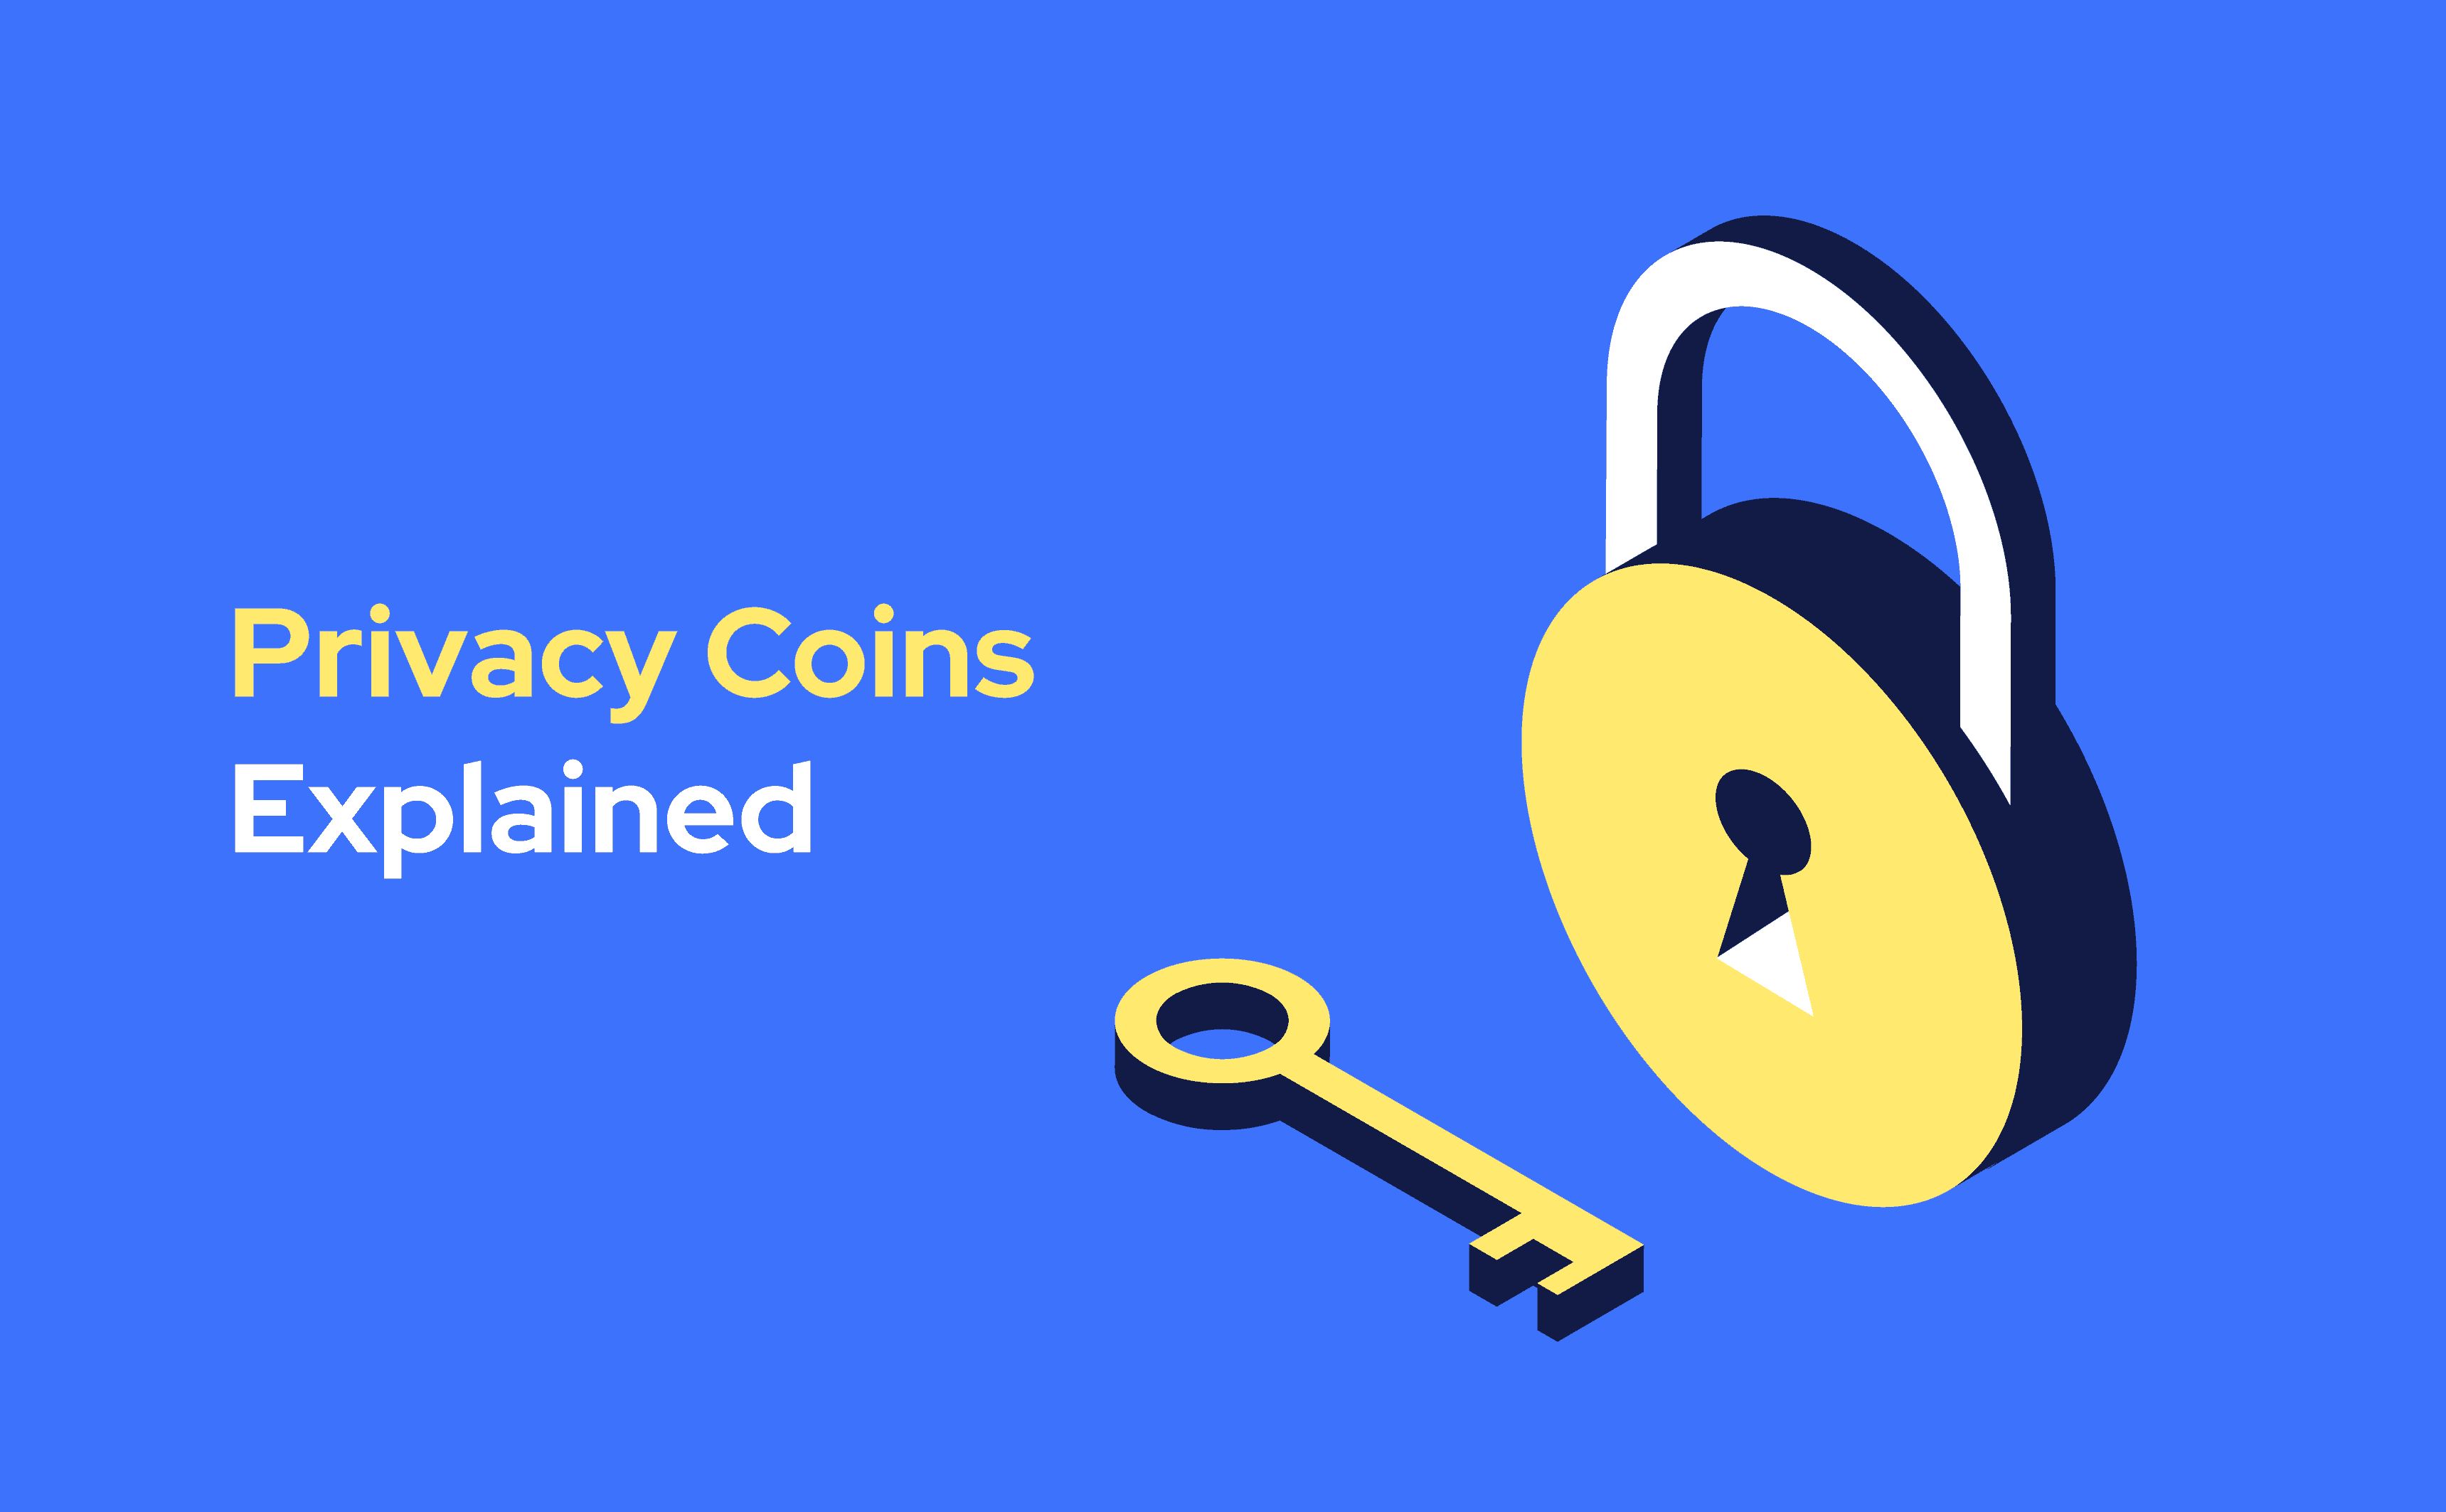 In this blog post, we explain about privacy coins.